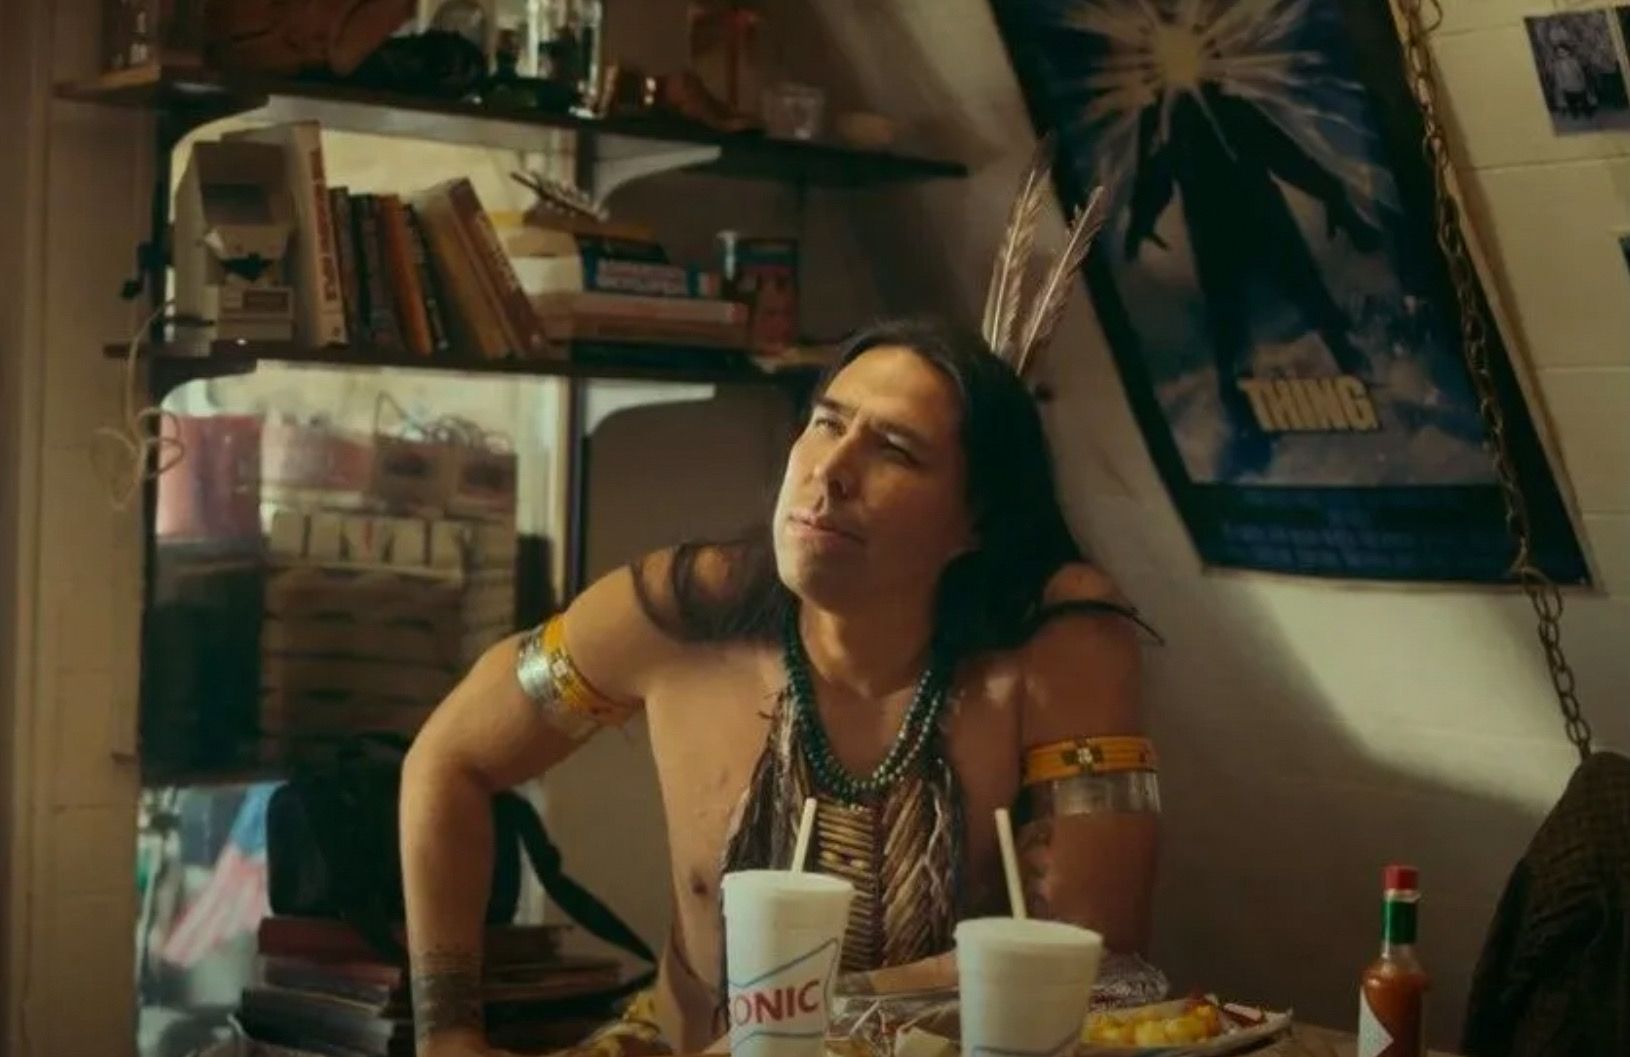 A still from an epsiode of Reservation Dogs, now in its second season on FX. Actor & writer Dallas Goldtooth is in traditional Native dress as the Ancestor, William Knifeman.